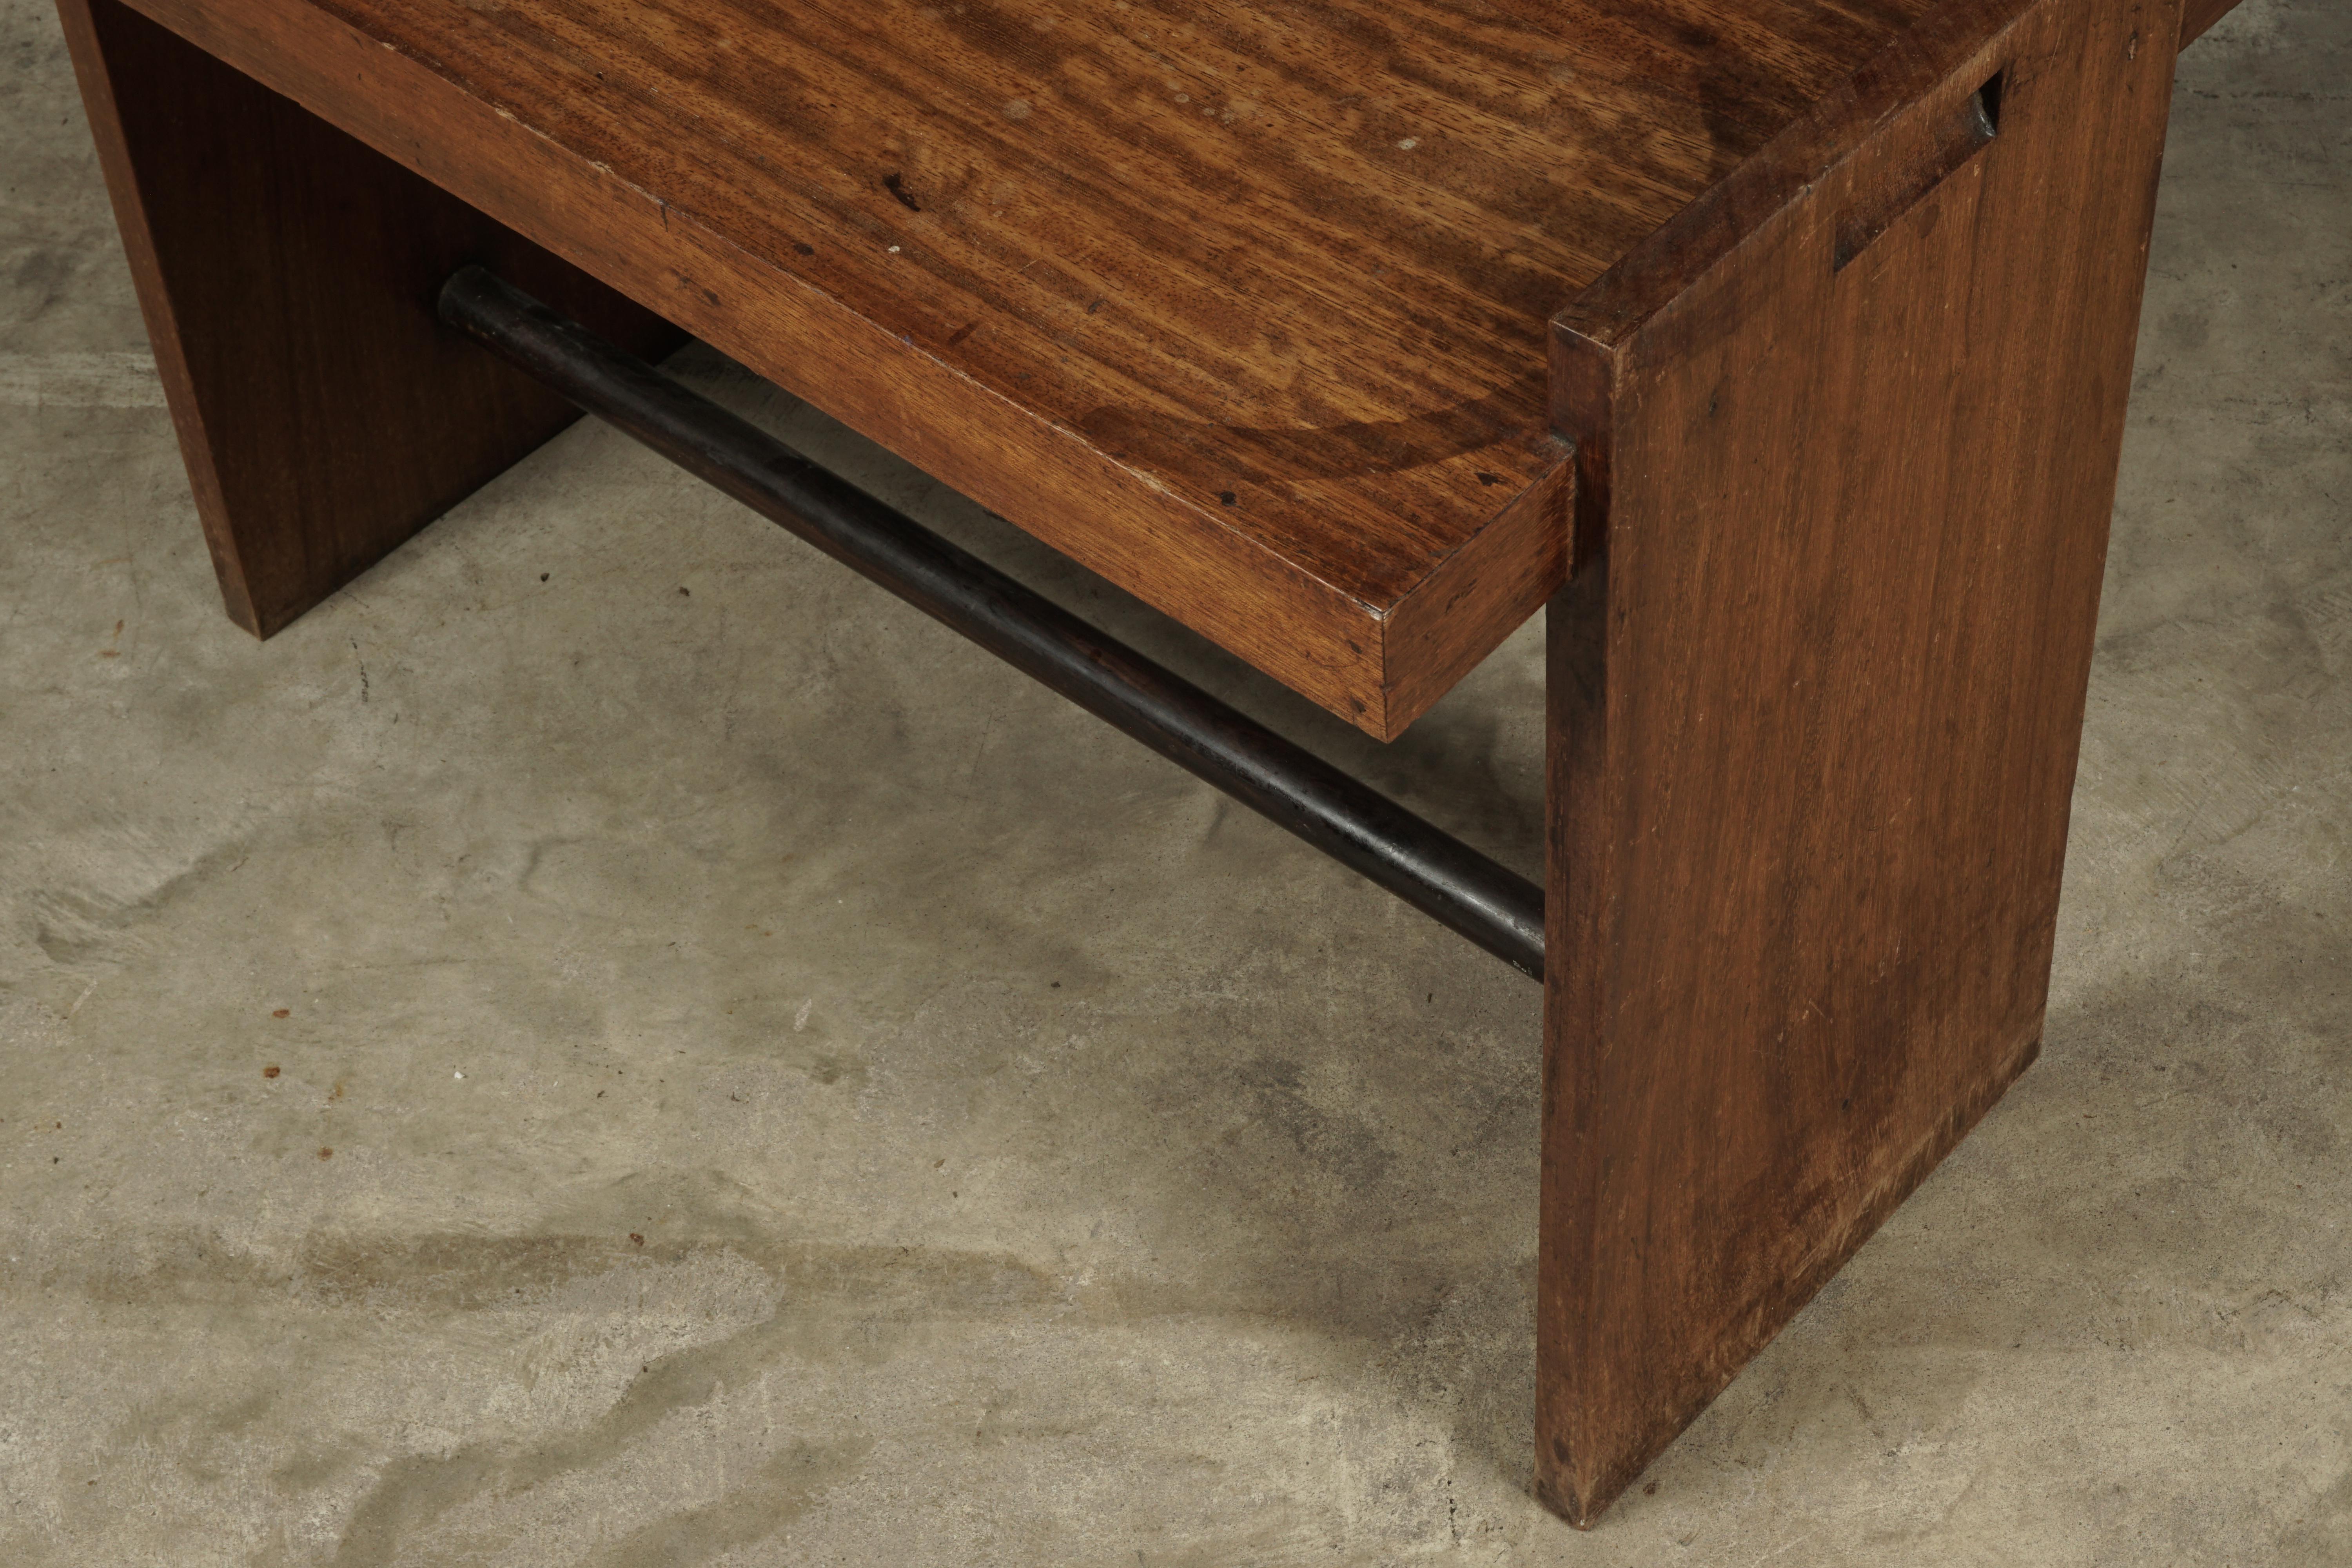 European Midcentury Side Table from France, circa 1960